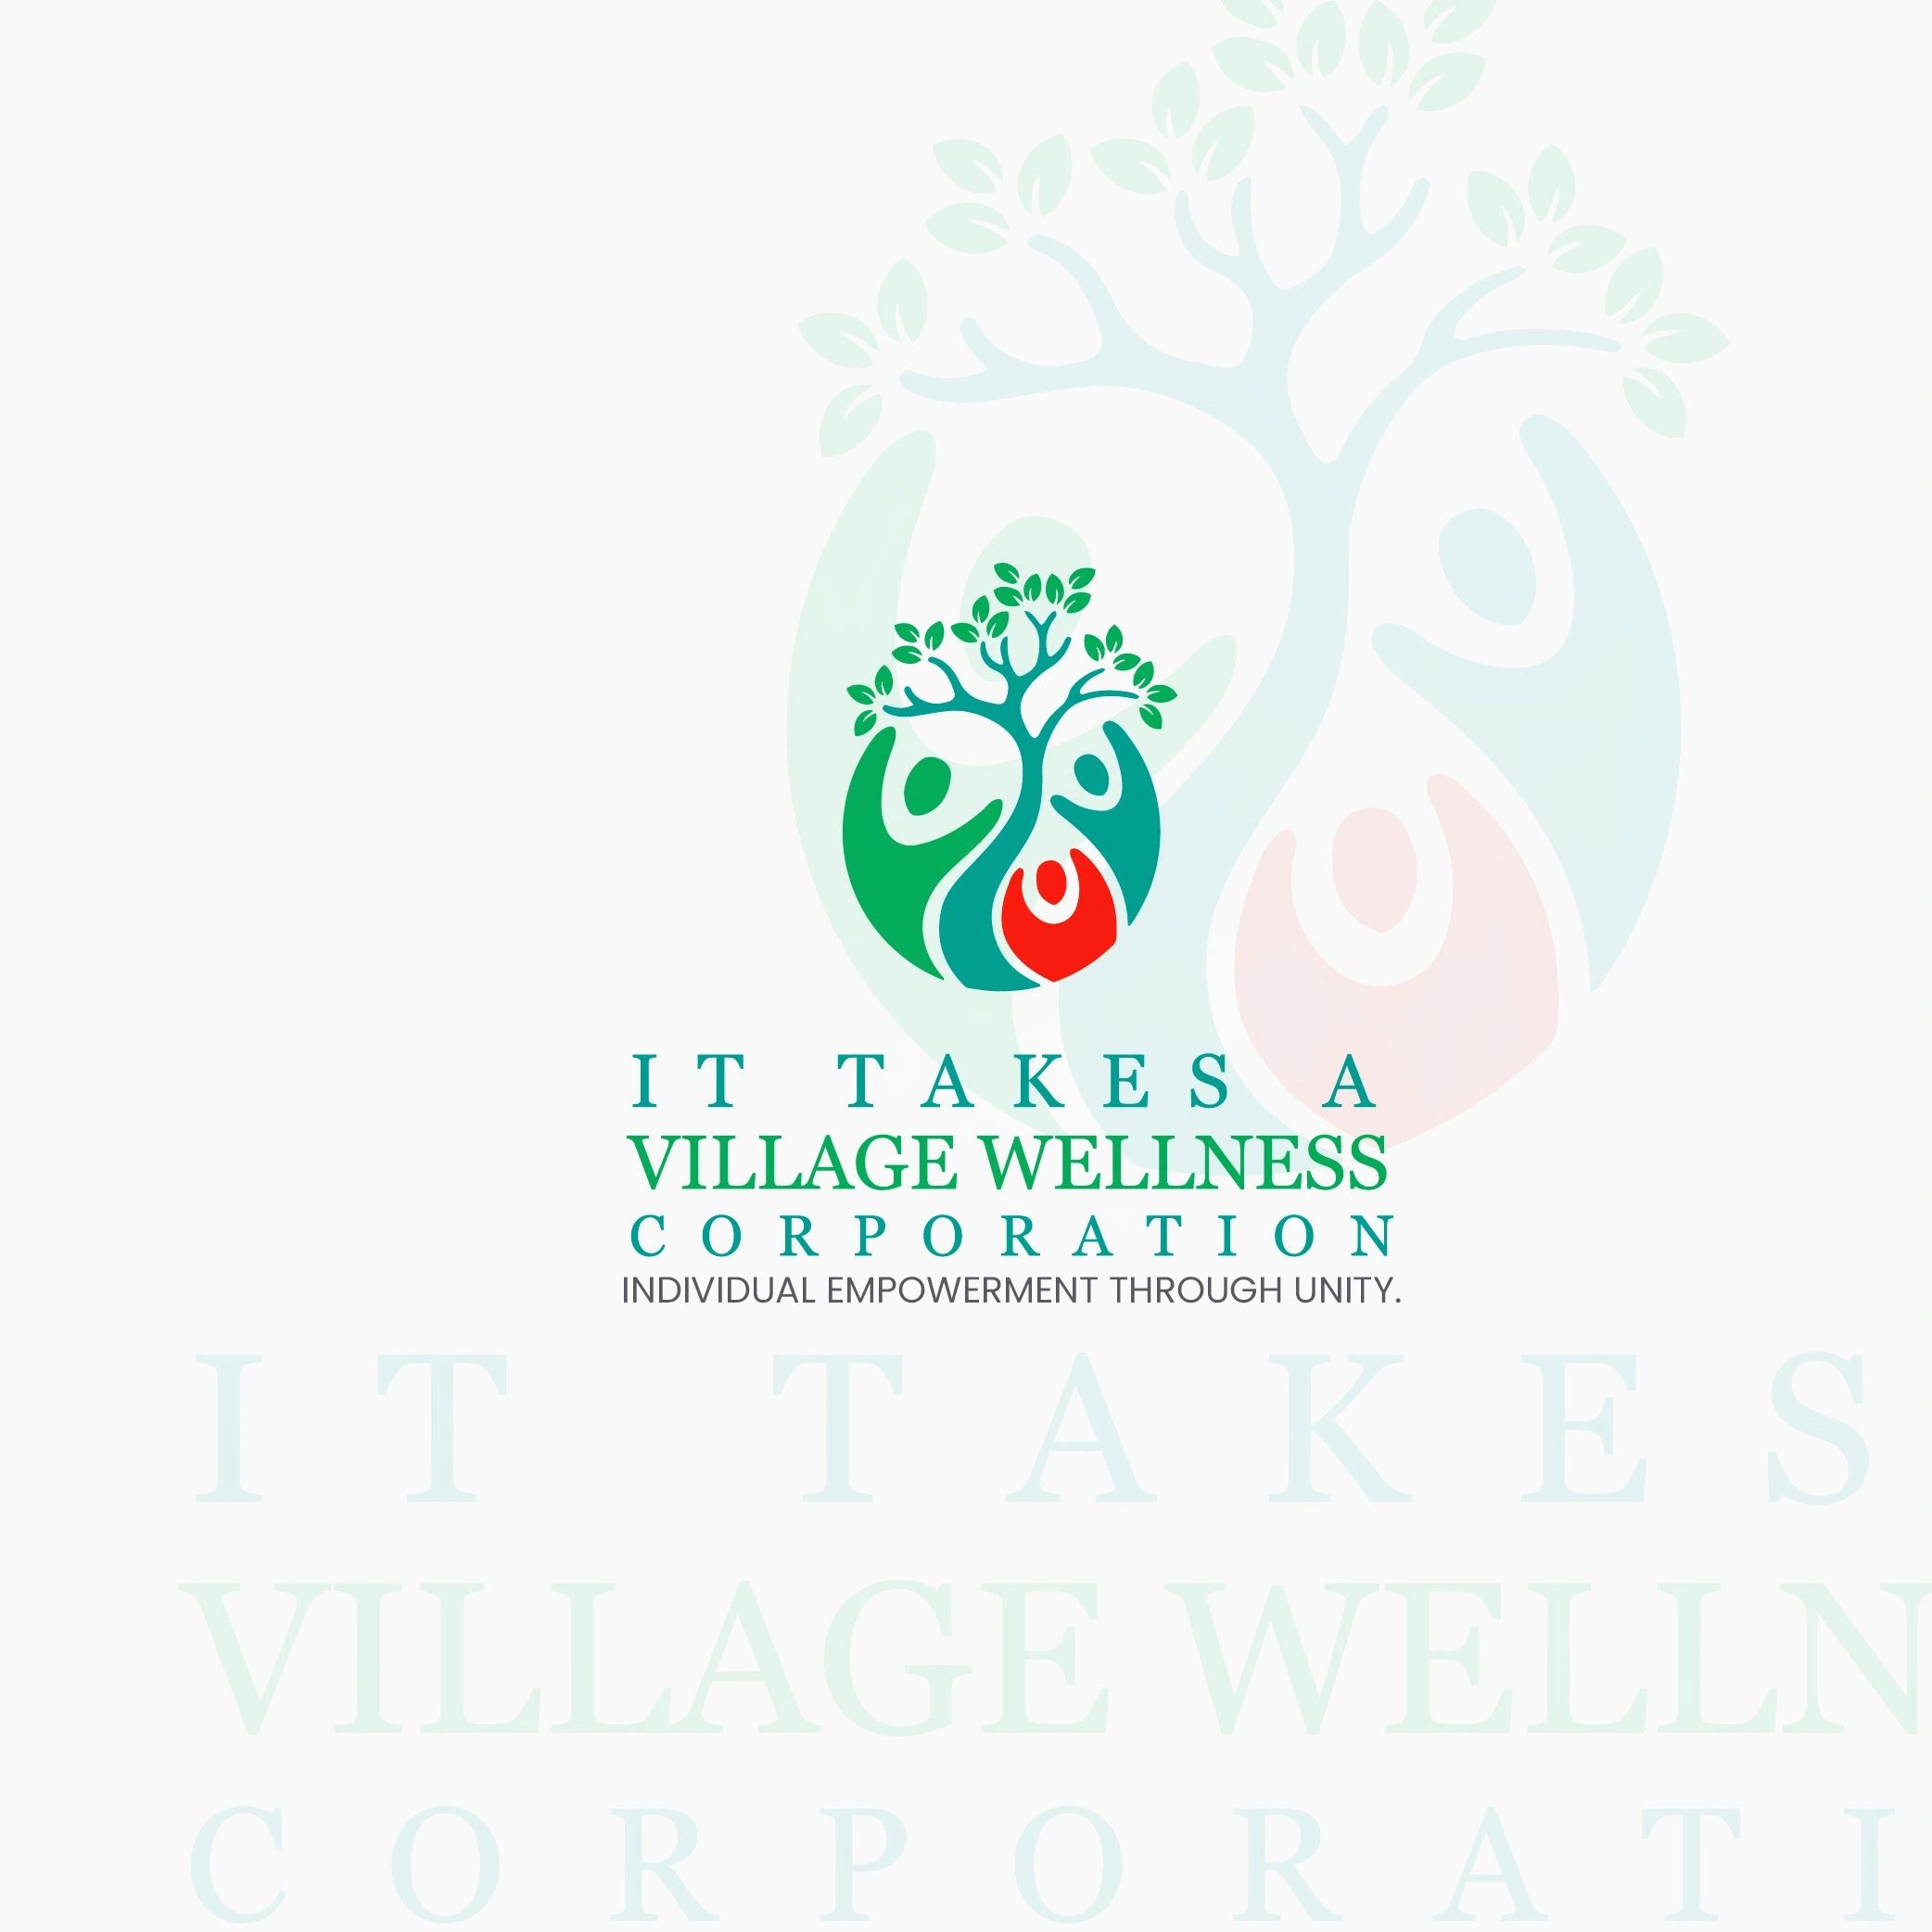 It Takes A Village Wellness Corporation